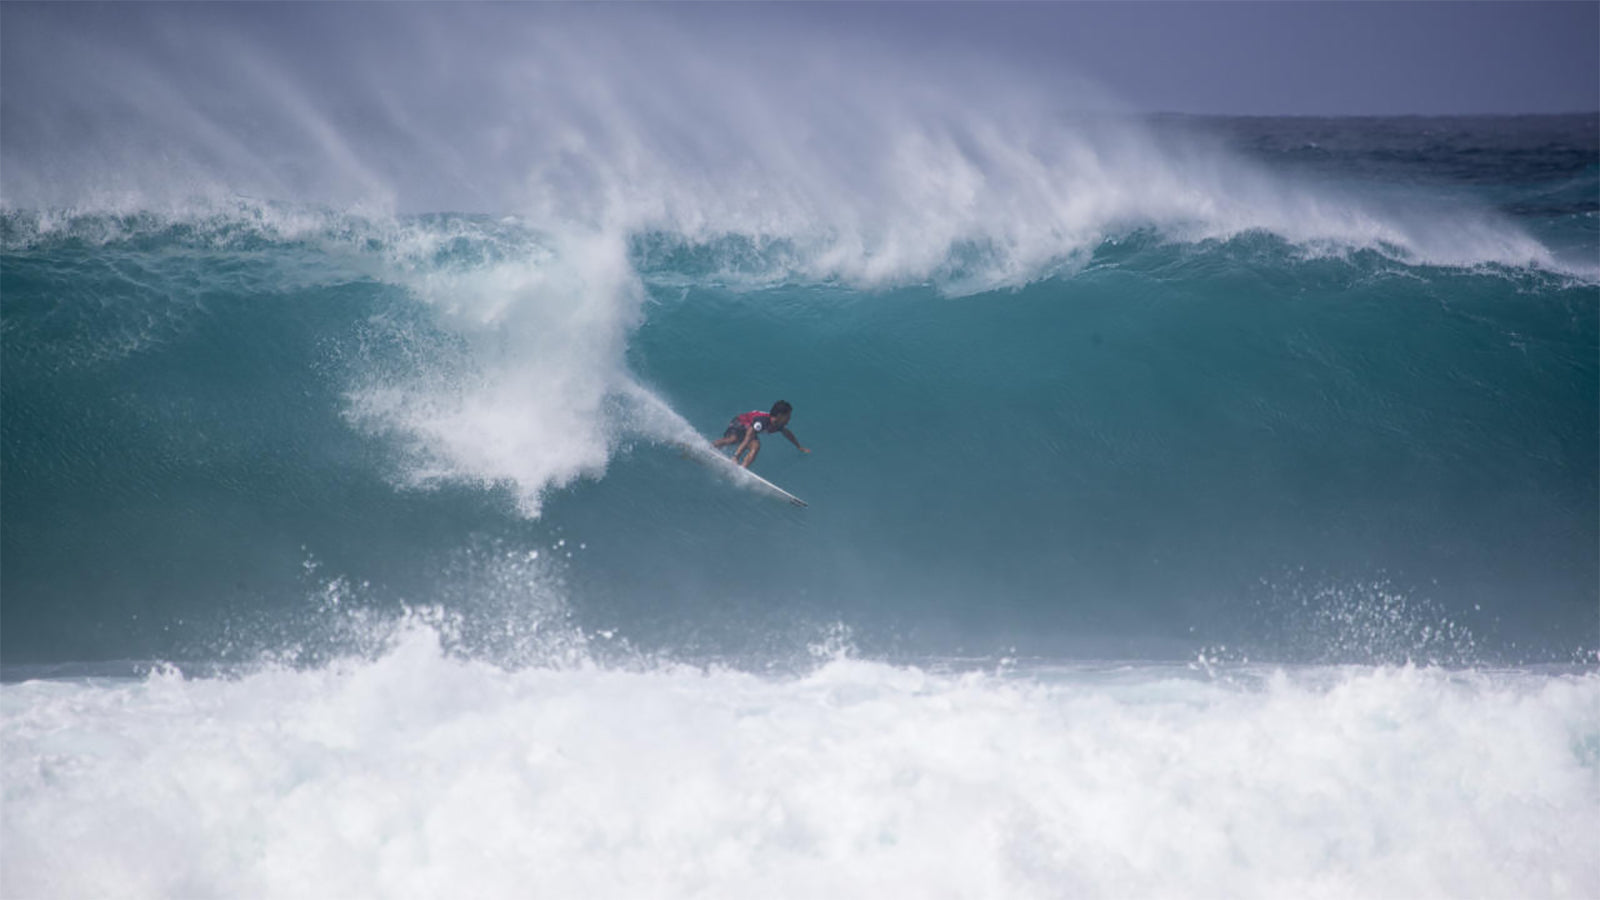 OAHU, UNITED STATES - FEBRUARY 2: Seth Moniz of Hawaii will surf in the semi finals of the 2020 Volcom Pipe Pro after placing first in quarter final heat 3 on February 2, 2020 at Pipeline in Oahu, Hawaii, United States. (Photo by Tony Heff/WSL via Getty IOAHU, UNITED STATES - FEBRUARY 2: Seth Moniz of Hawaii will surf in the semi finals of the 2020 Volcom Pipe Pro after placing first in quarter final heat 3 on February 2, 2020 at Pipeline in Oahu, Hawaii, United States. (Photo by Tony Heff/WSL via Getty